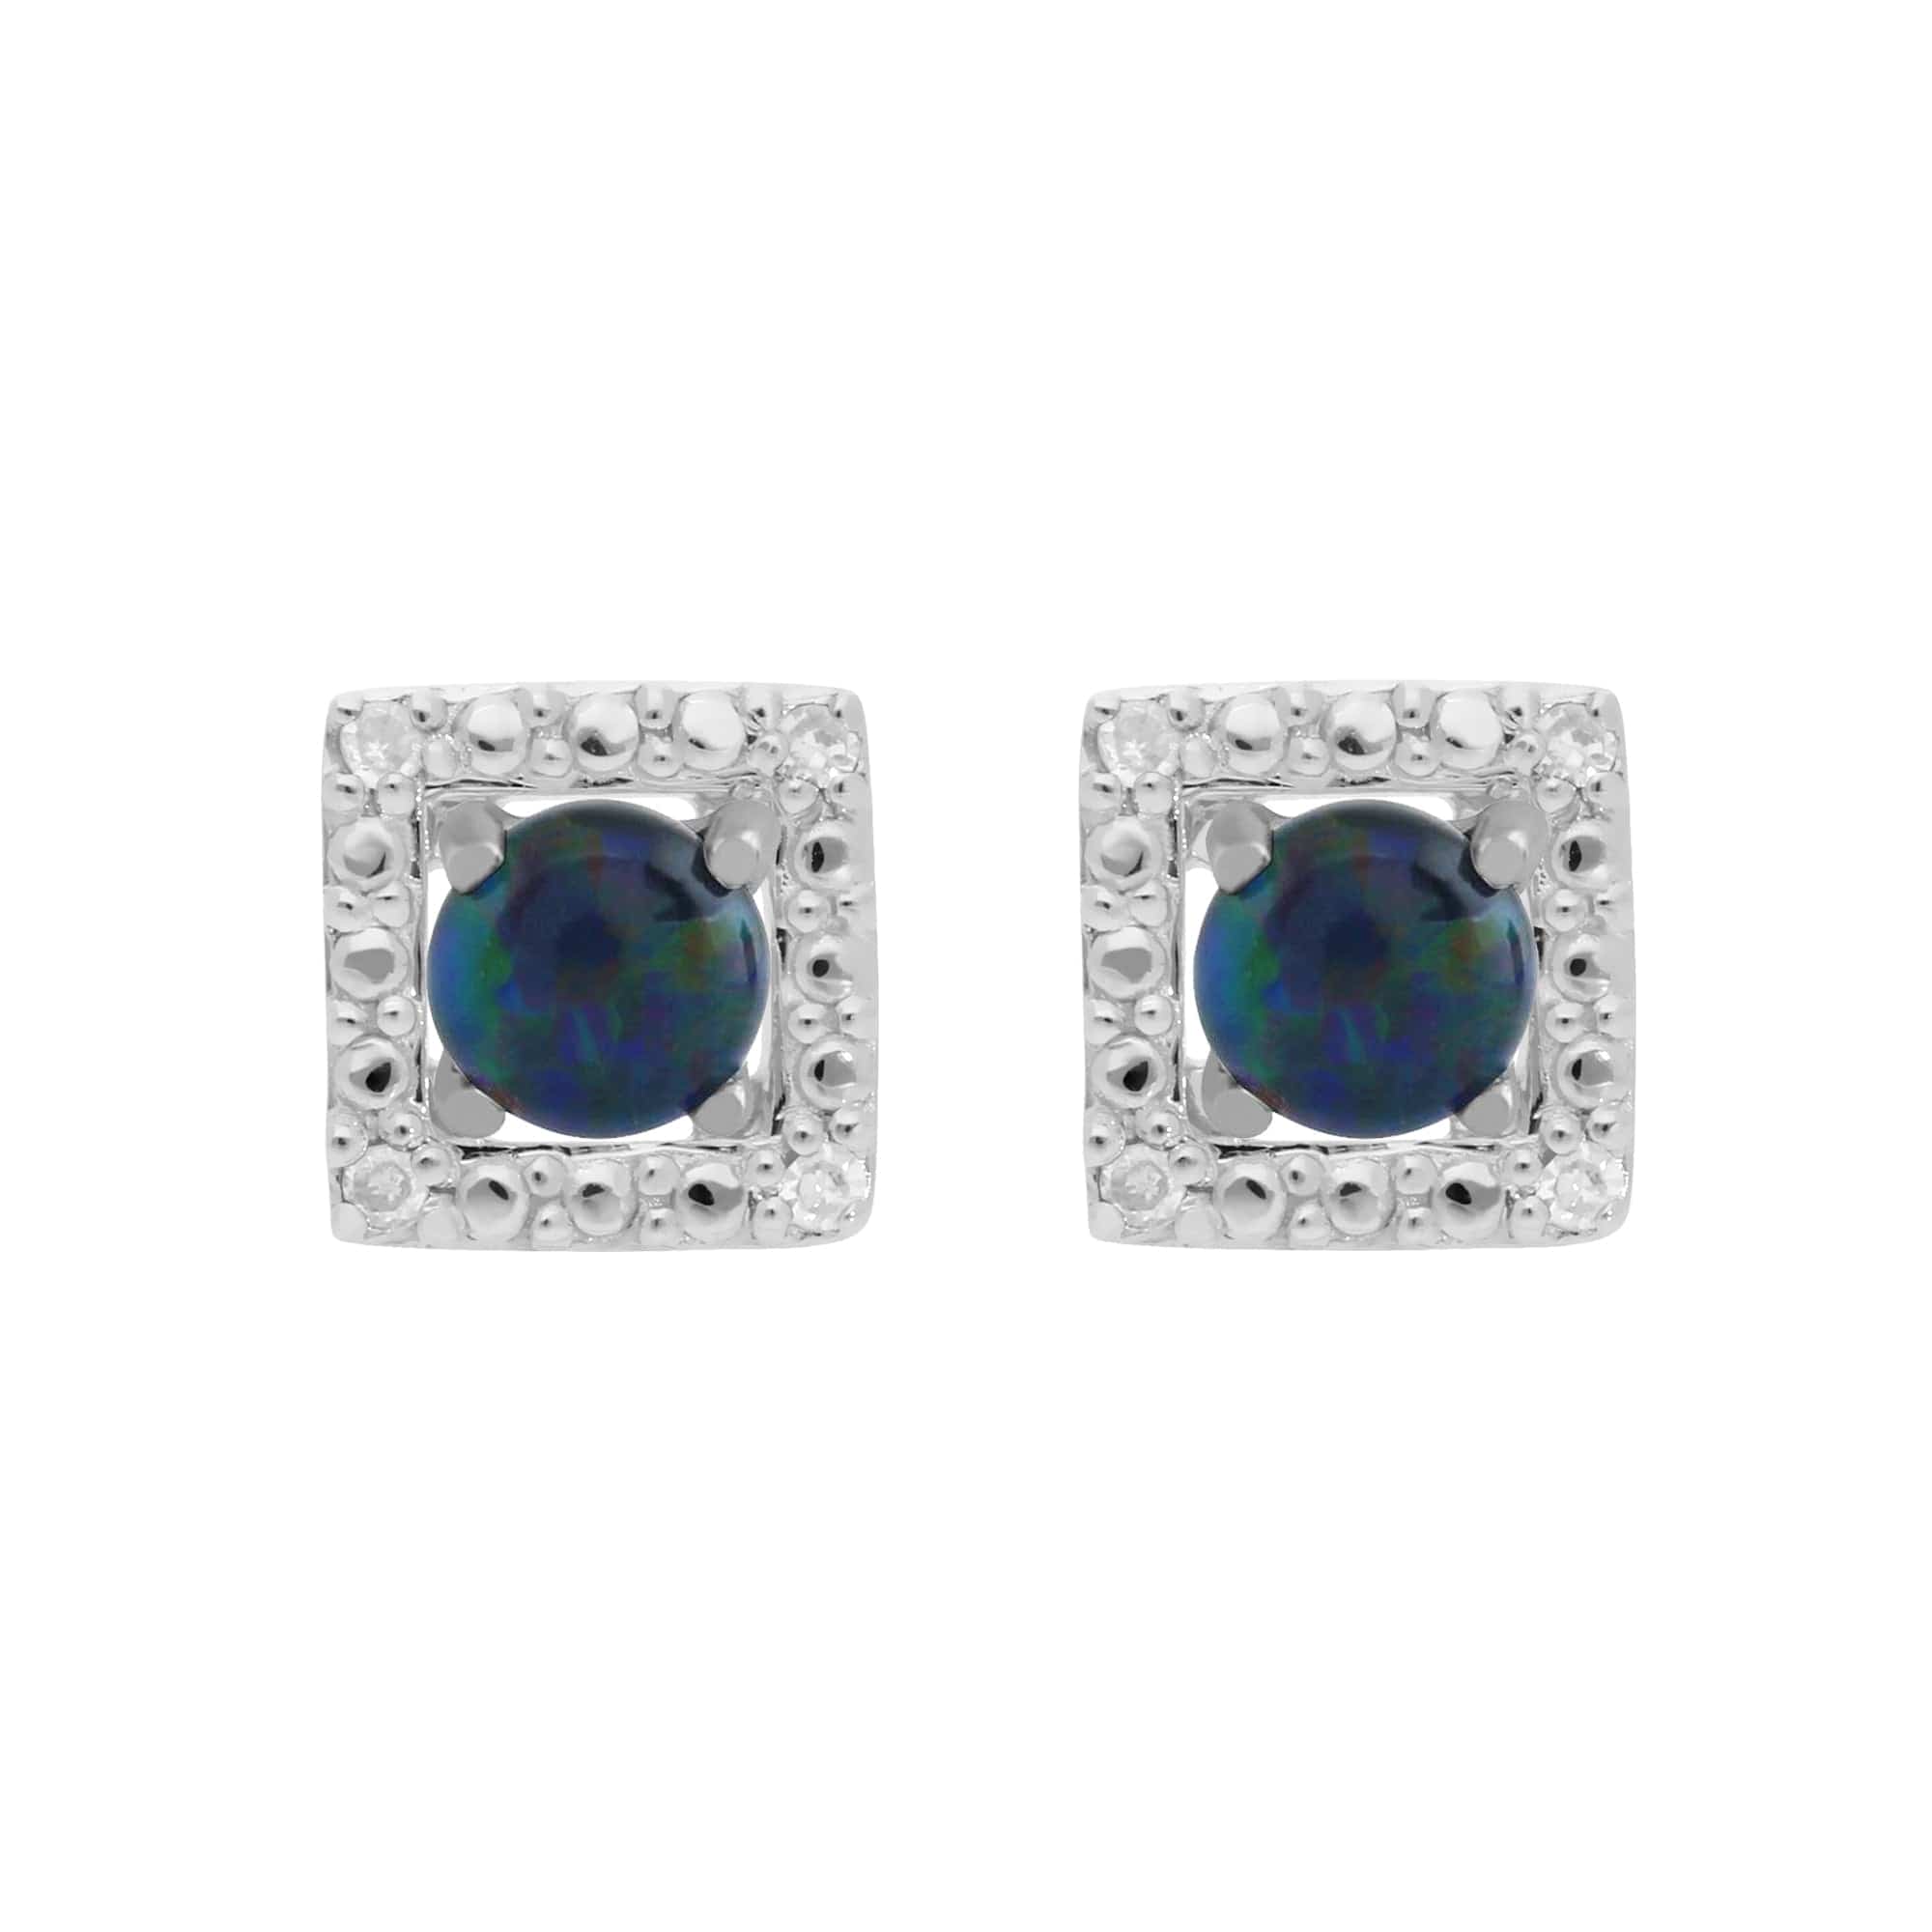 162E0071209-162E0245019 Classic Round Triplet Opal Studs with Detachable Diamond Square Ear Jacket in 9ct White Gold 1